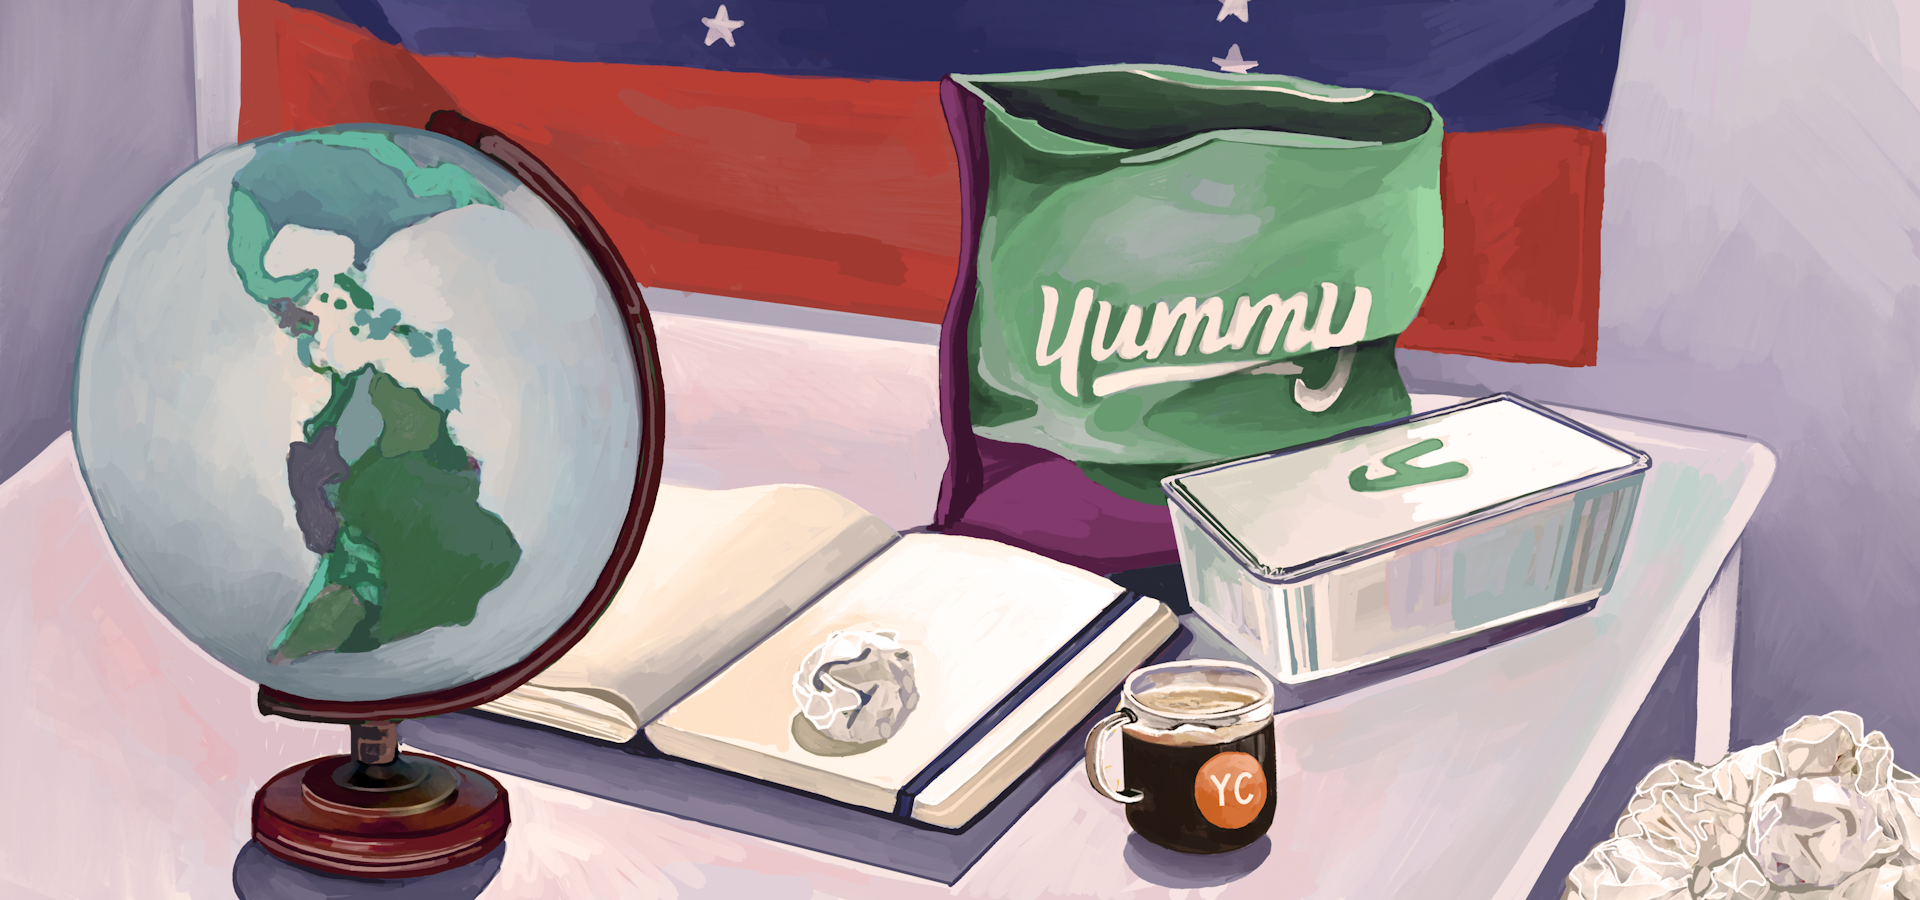 Illustration for customer story about Yummy, co-founder and CEO of Yummy, by UK artist Amy Leonard.